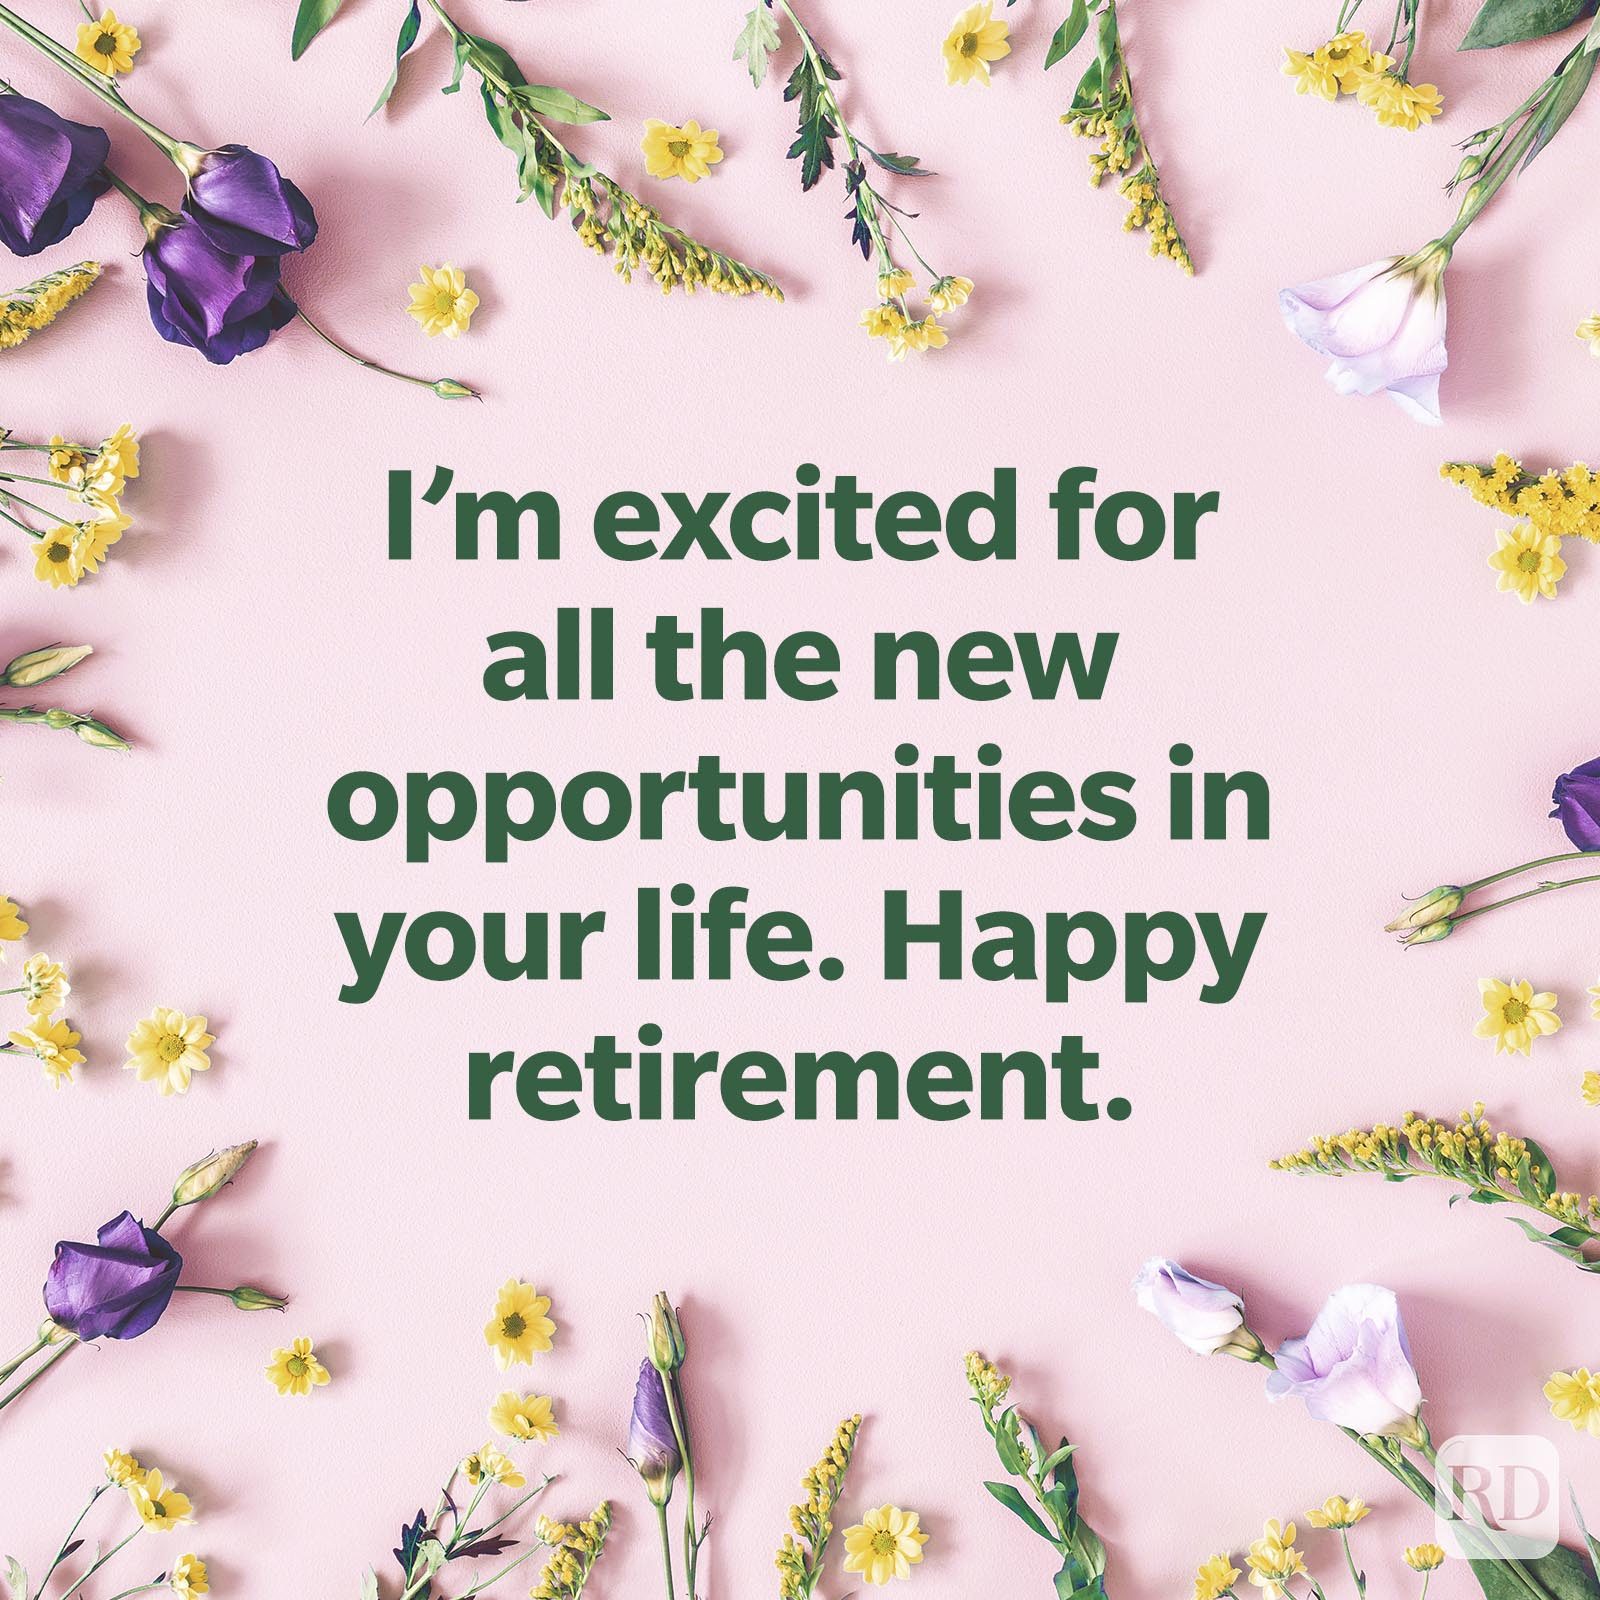 Congratulations, you've finally reached retirement now what?